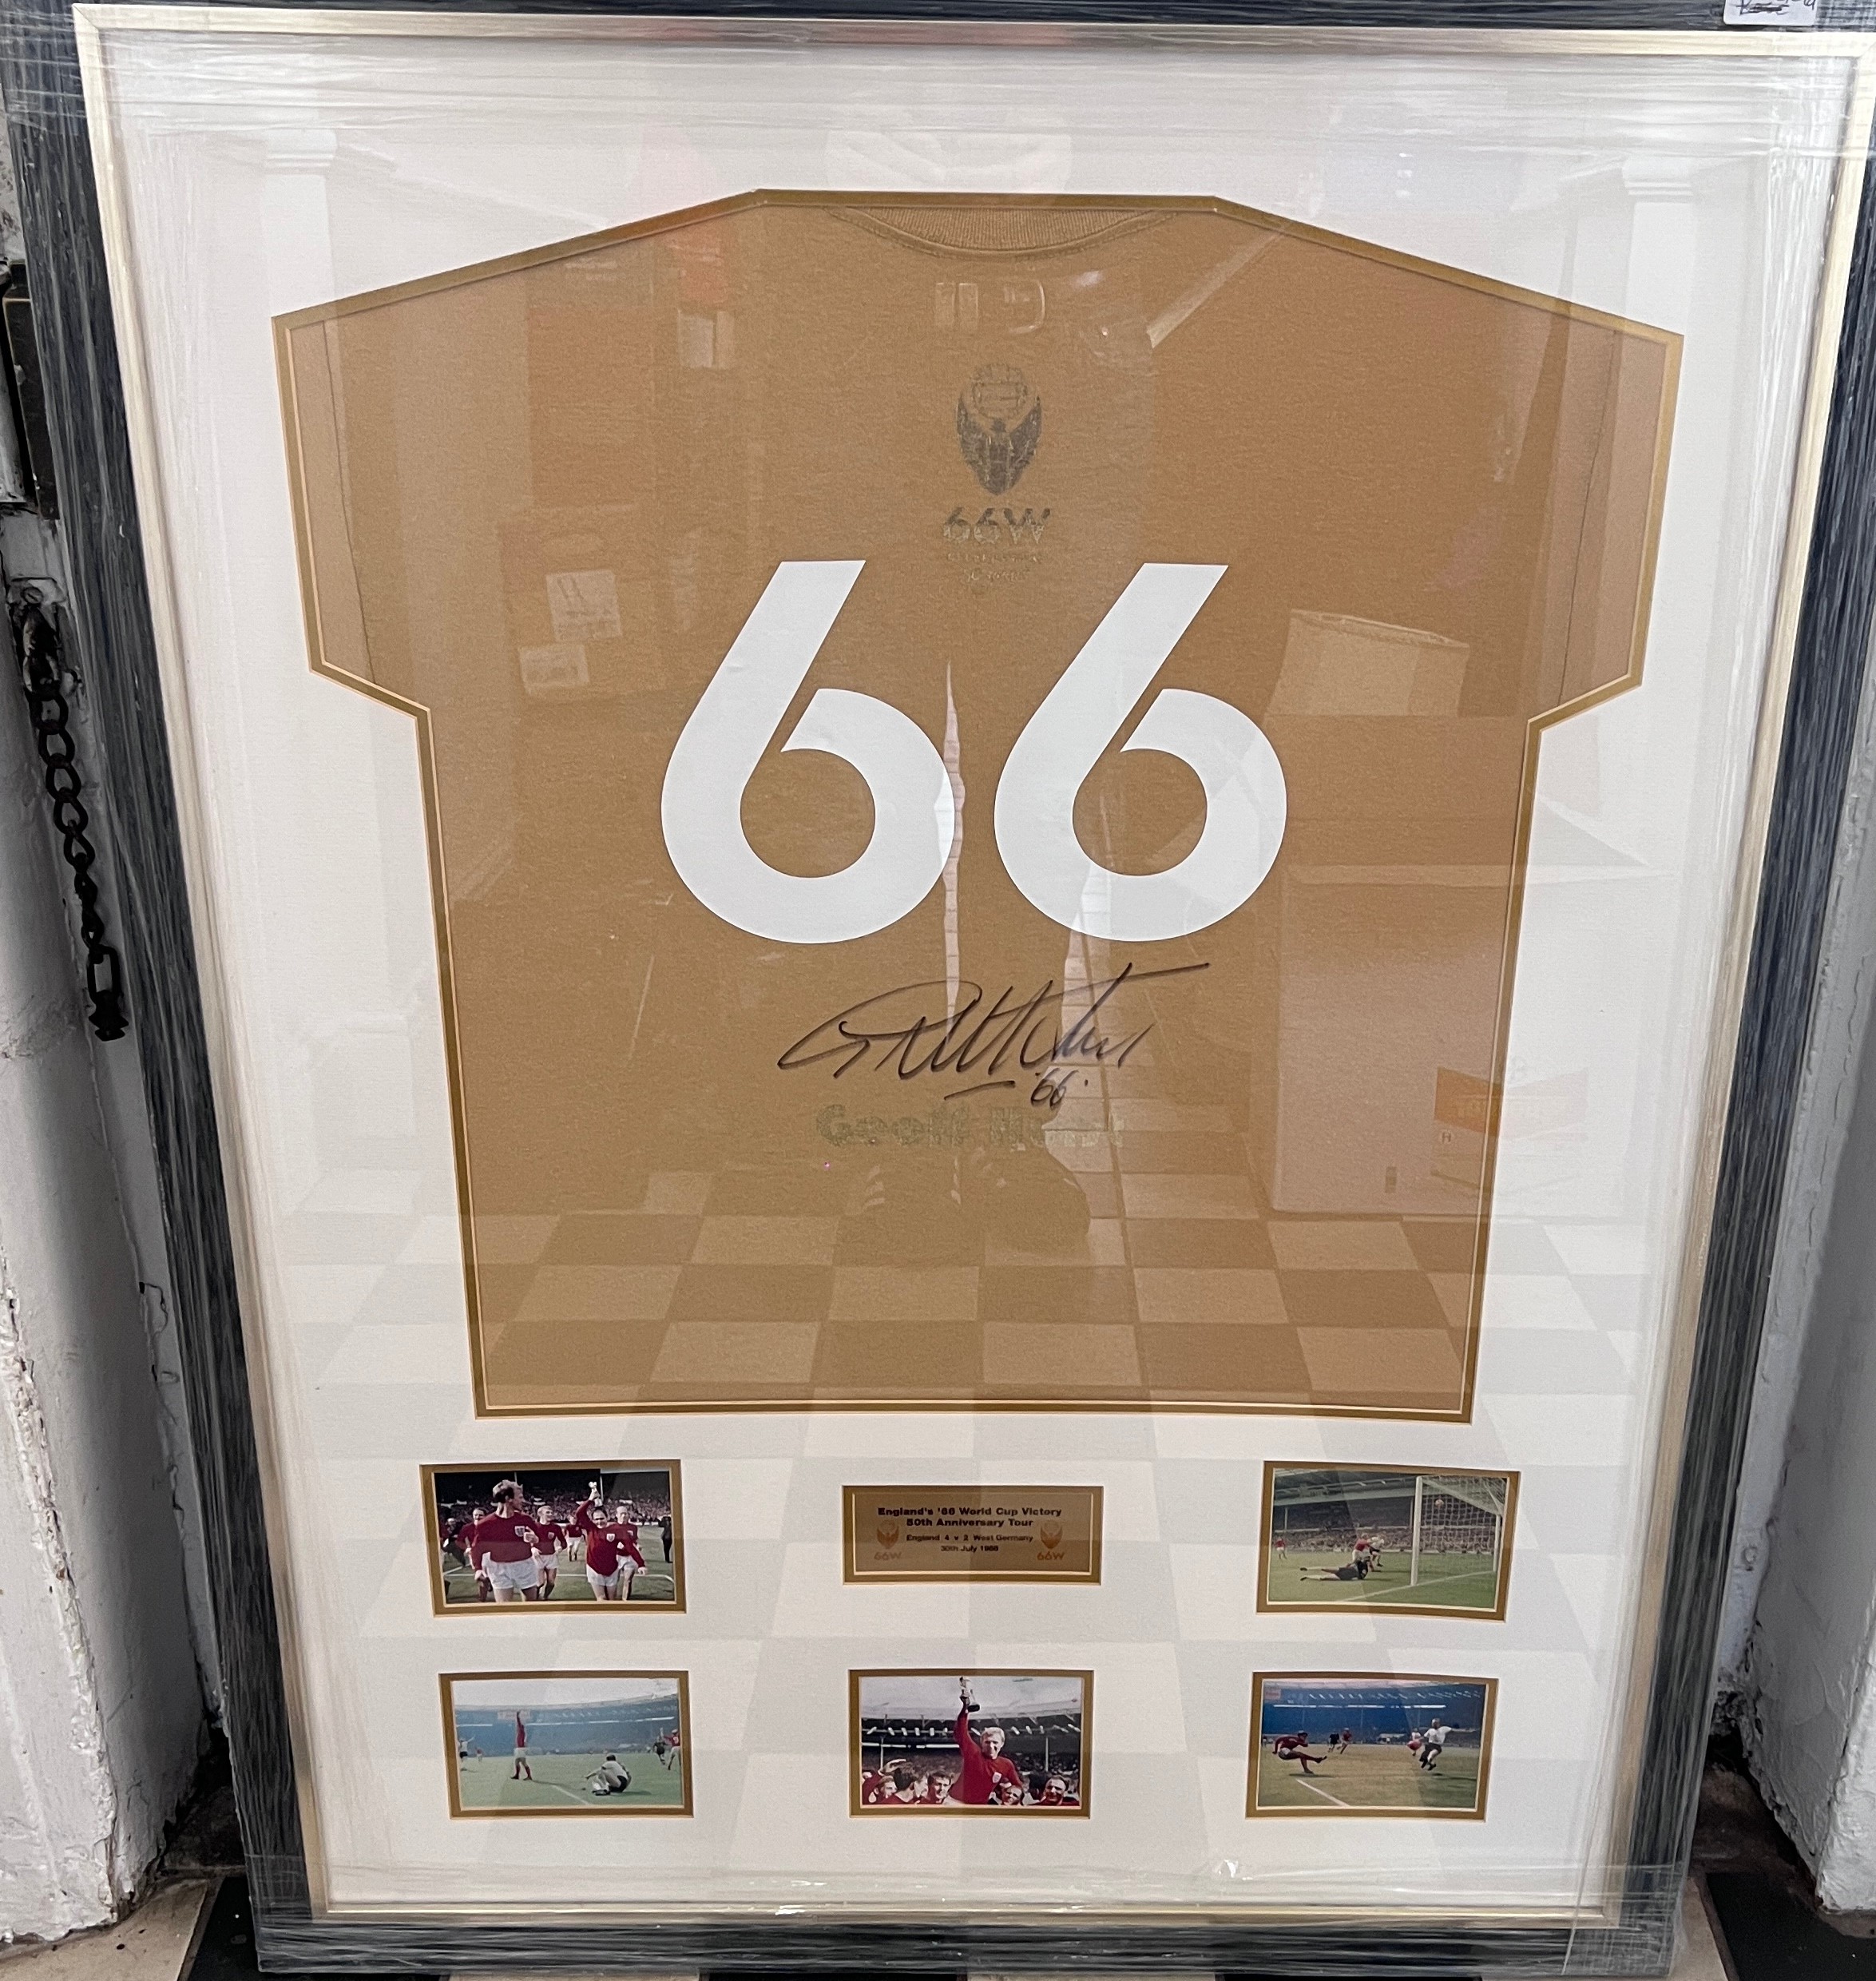 A Geoff Hurst signed shirt to commemorate England's '66 World Cup Victory 50th Anniversary Tour.